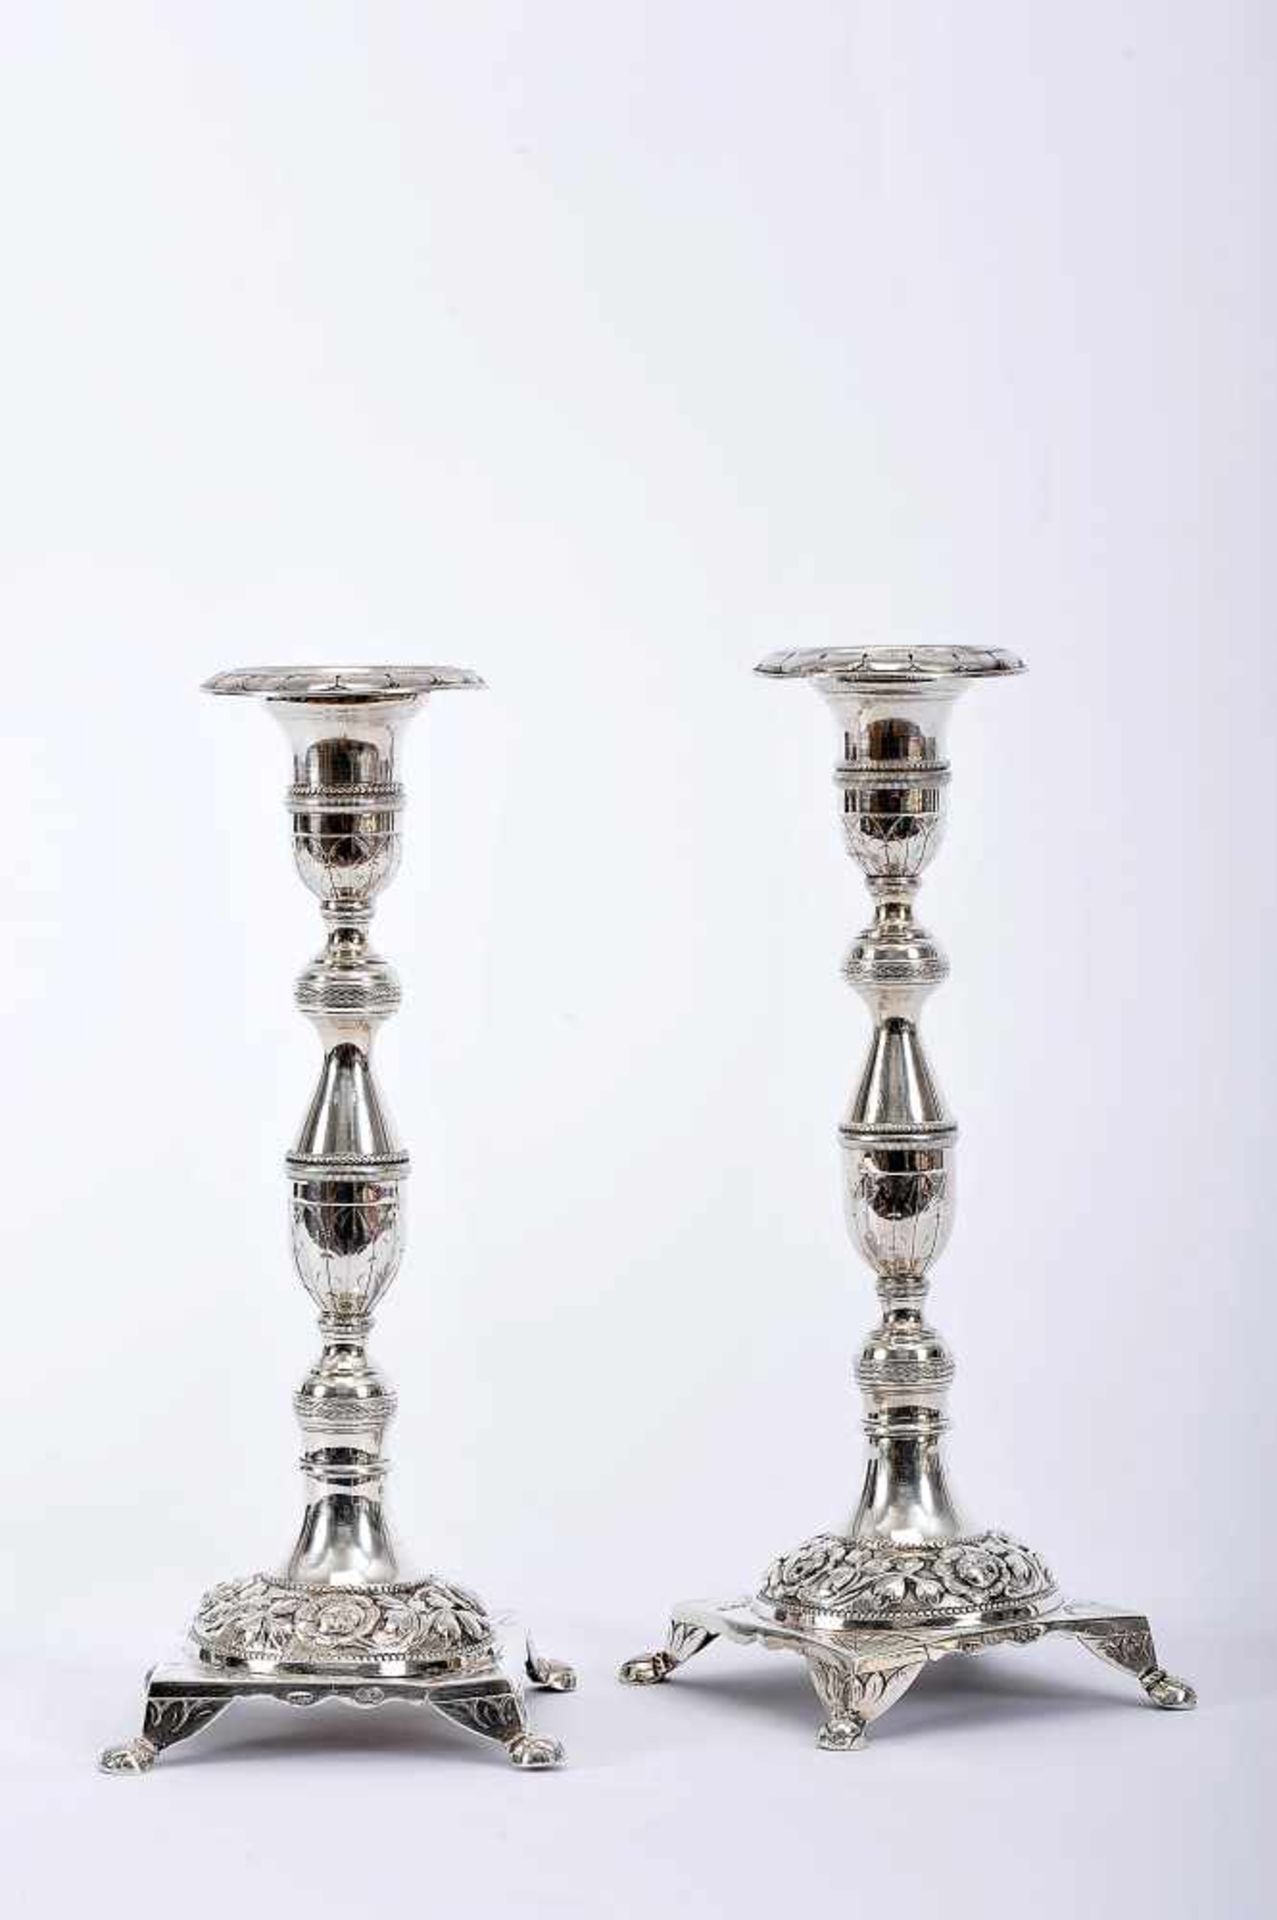 A Pair of Candlesticks, romantic, 833/1000 silver, engraved decoration en relief "Flowers",